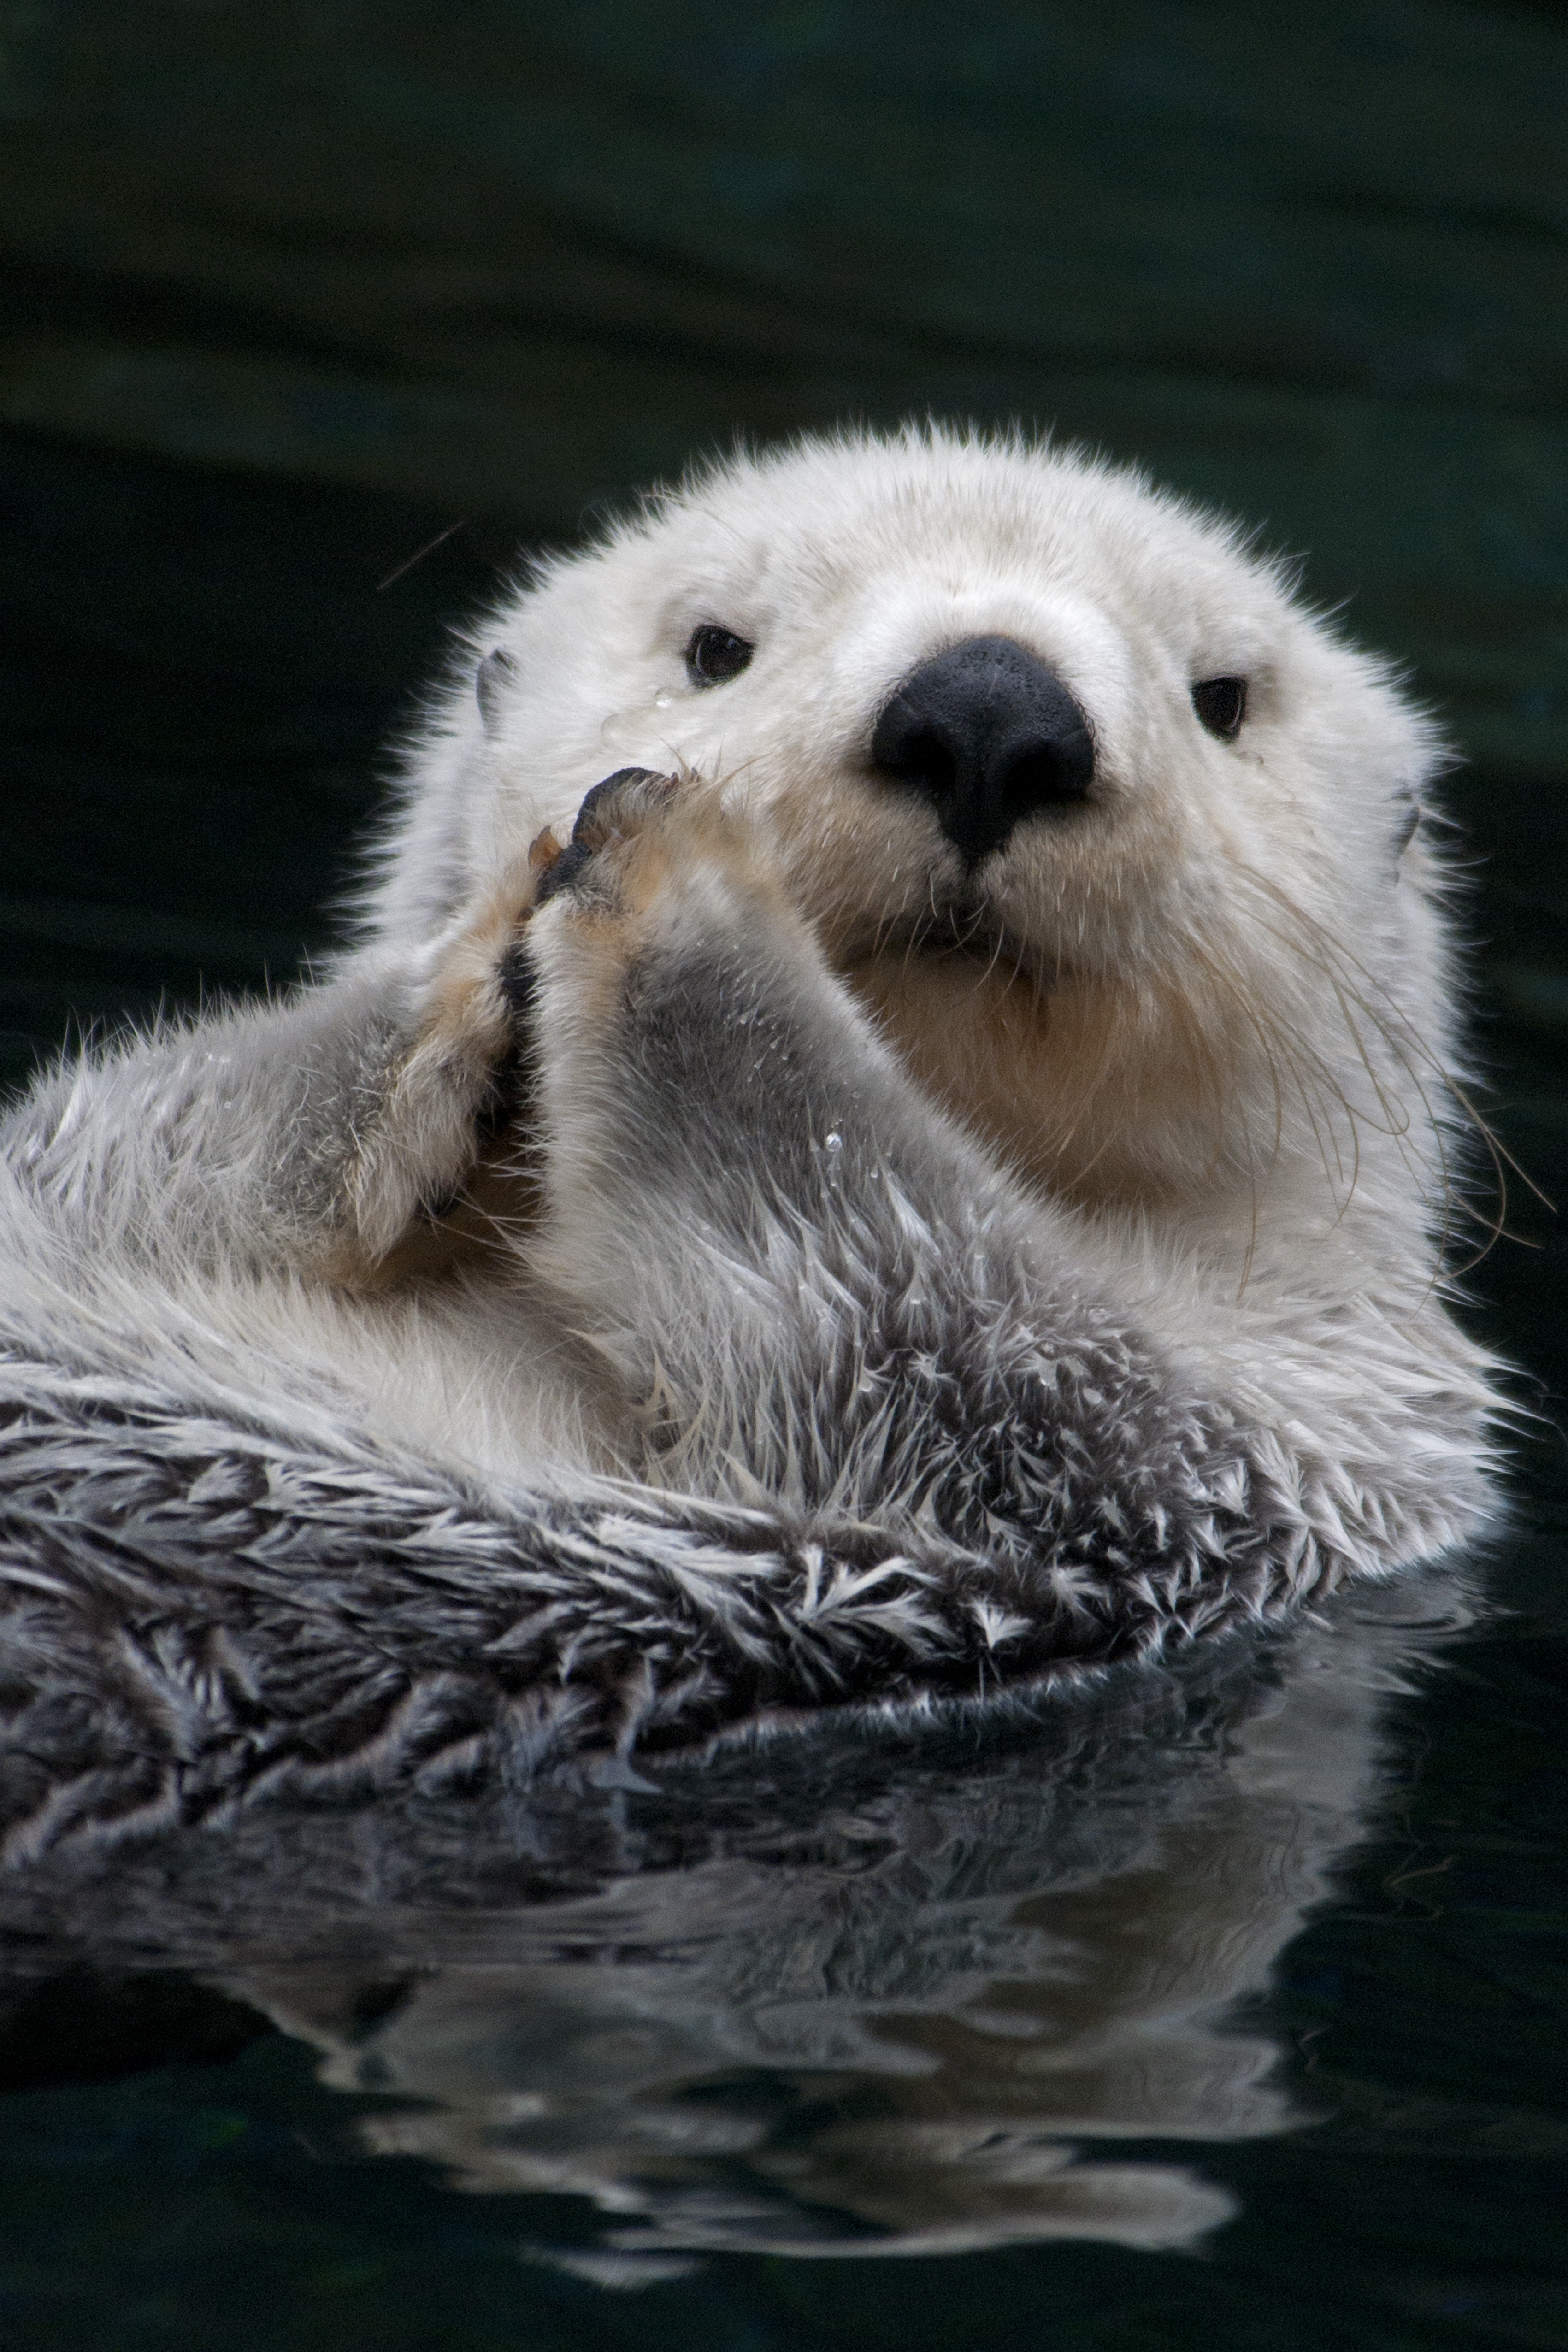 A sea otter floats on its back in the water, with its front paws pressed together near its face, appearing as if it is clapping or praying